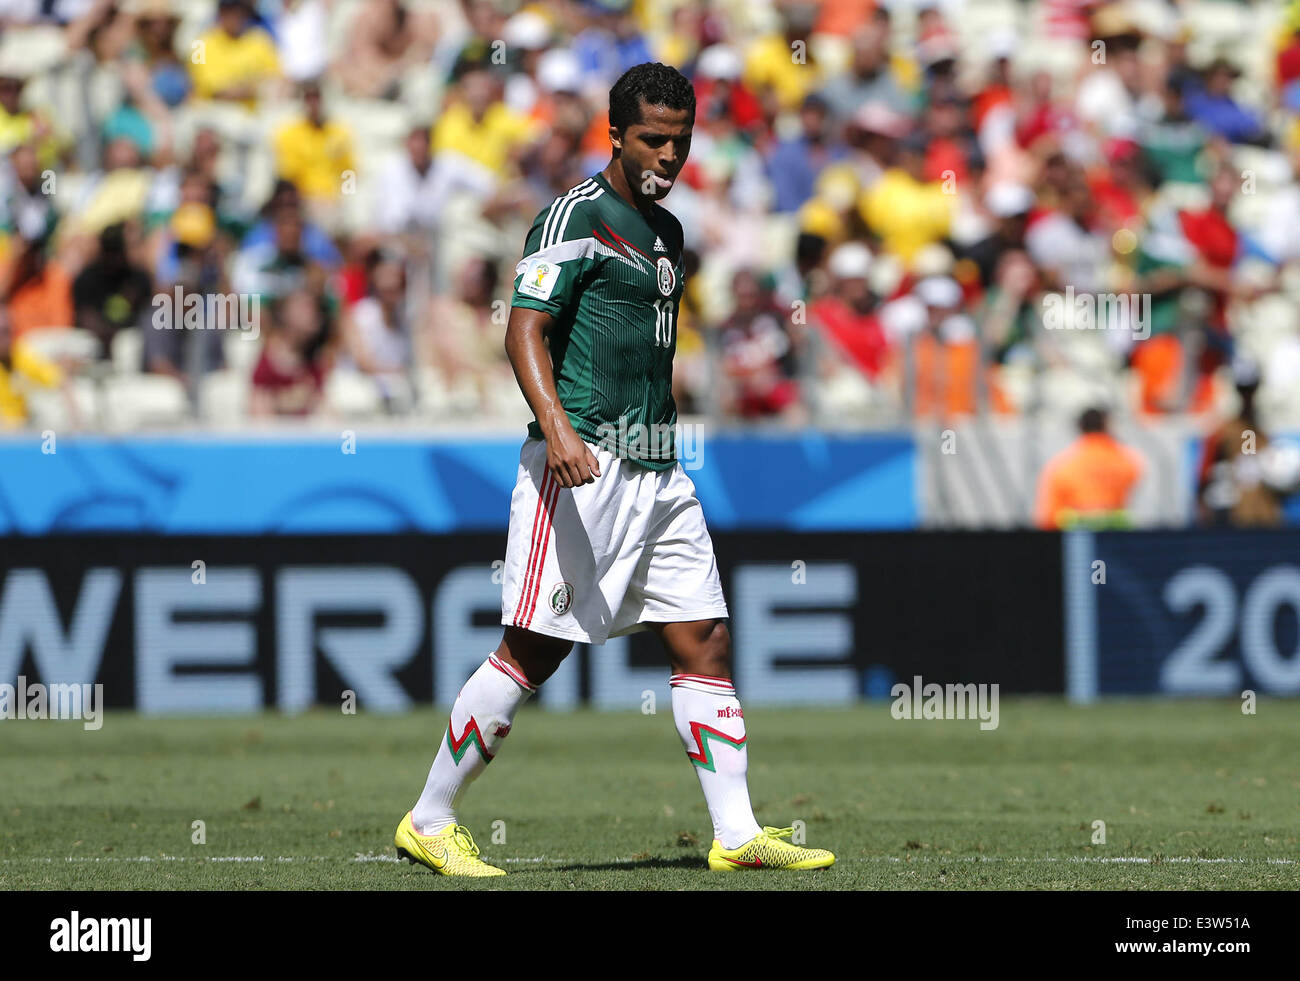 Fortaleza, Brazil. 29th June, 2014. Mexico's Giovani dos Santos reacts during a Round of 16 match between Netherlands and Mexico of 2014 FIFA World Cup at the Estadio Castelao Stadium in Fortaleza, Brazil, on June 29, 2014. Credit:  Zhou Lei/Xinhua/Alamy Live News Stock Photo